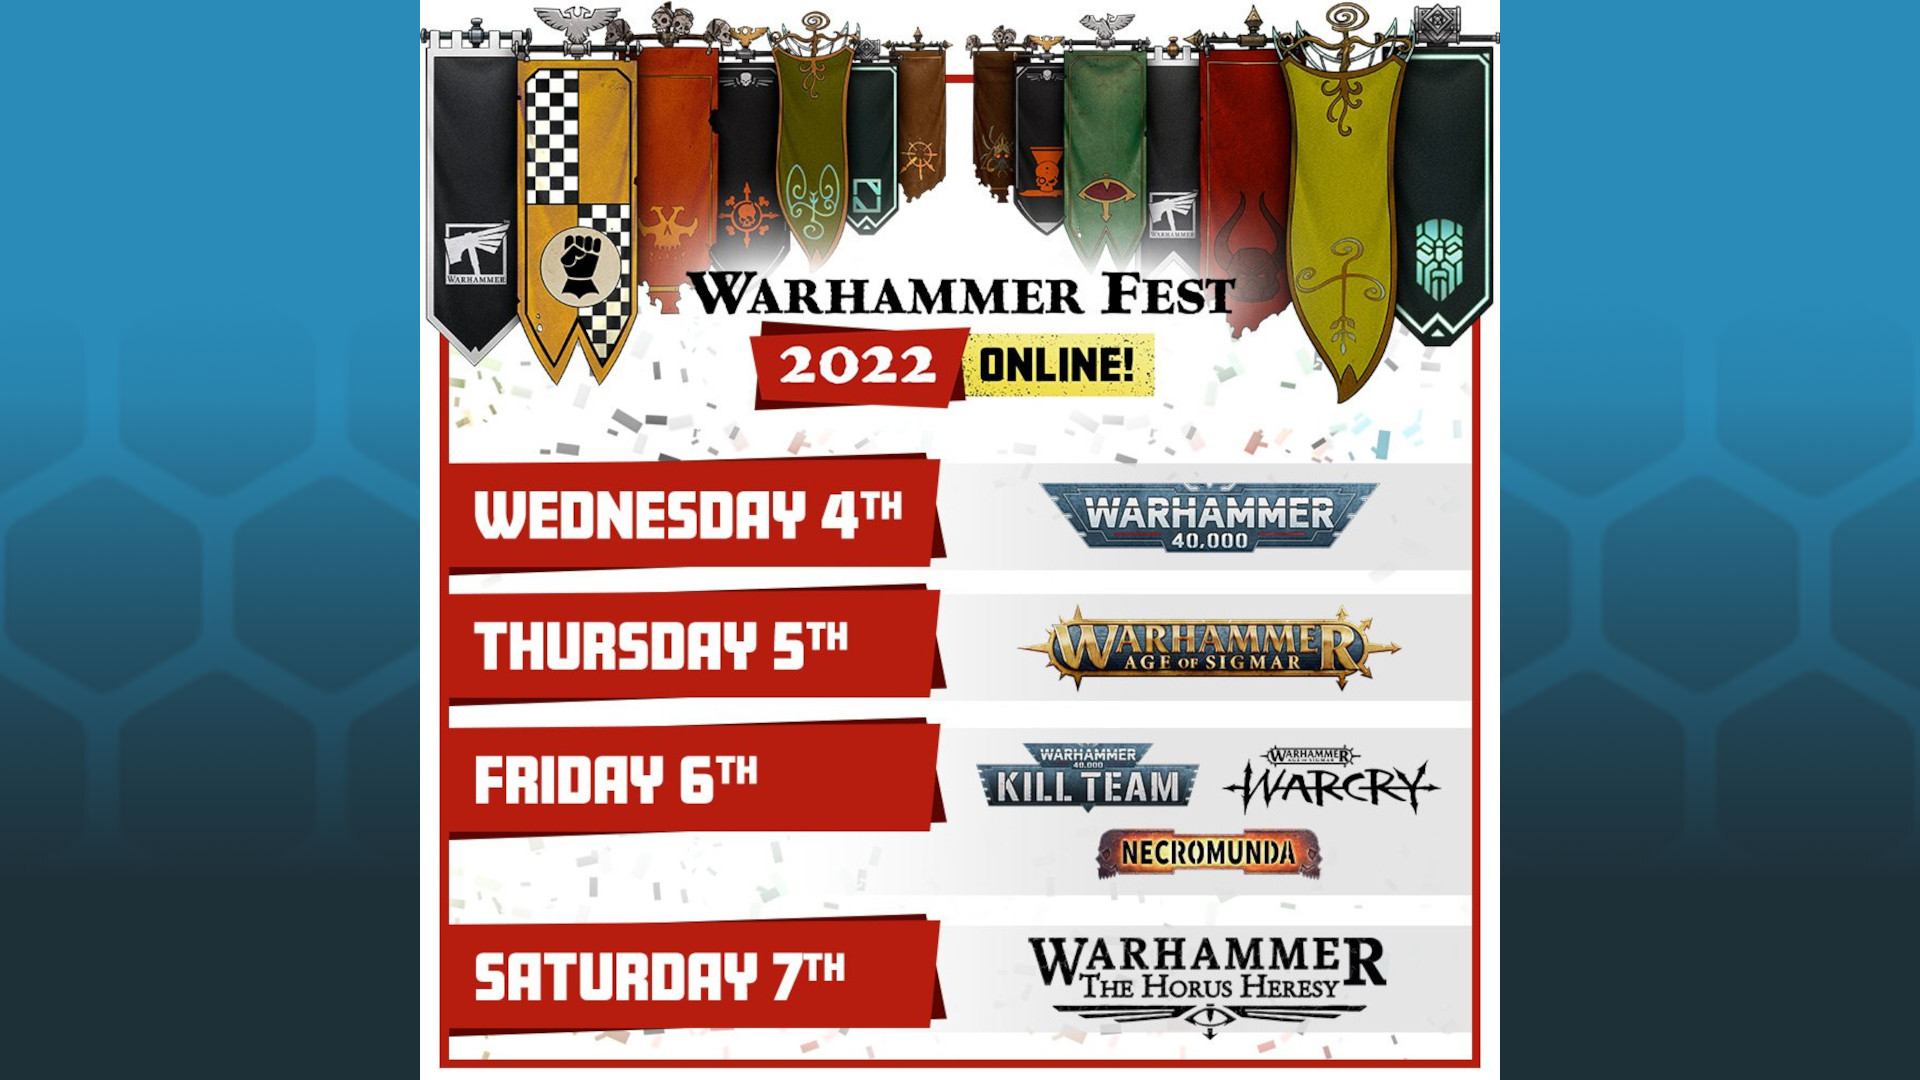 Warhammer Fest 2022 stream reveals new Chaos Space Marines